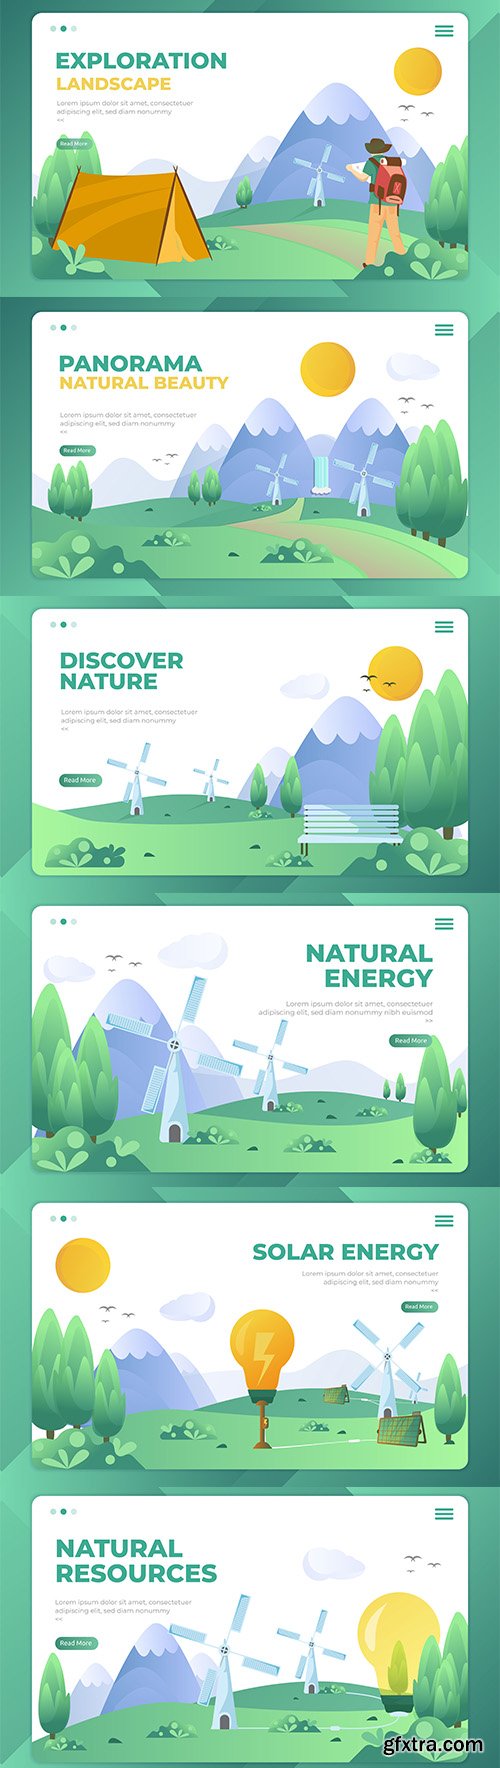 Natural Resources Landing Page Templates